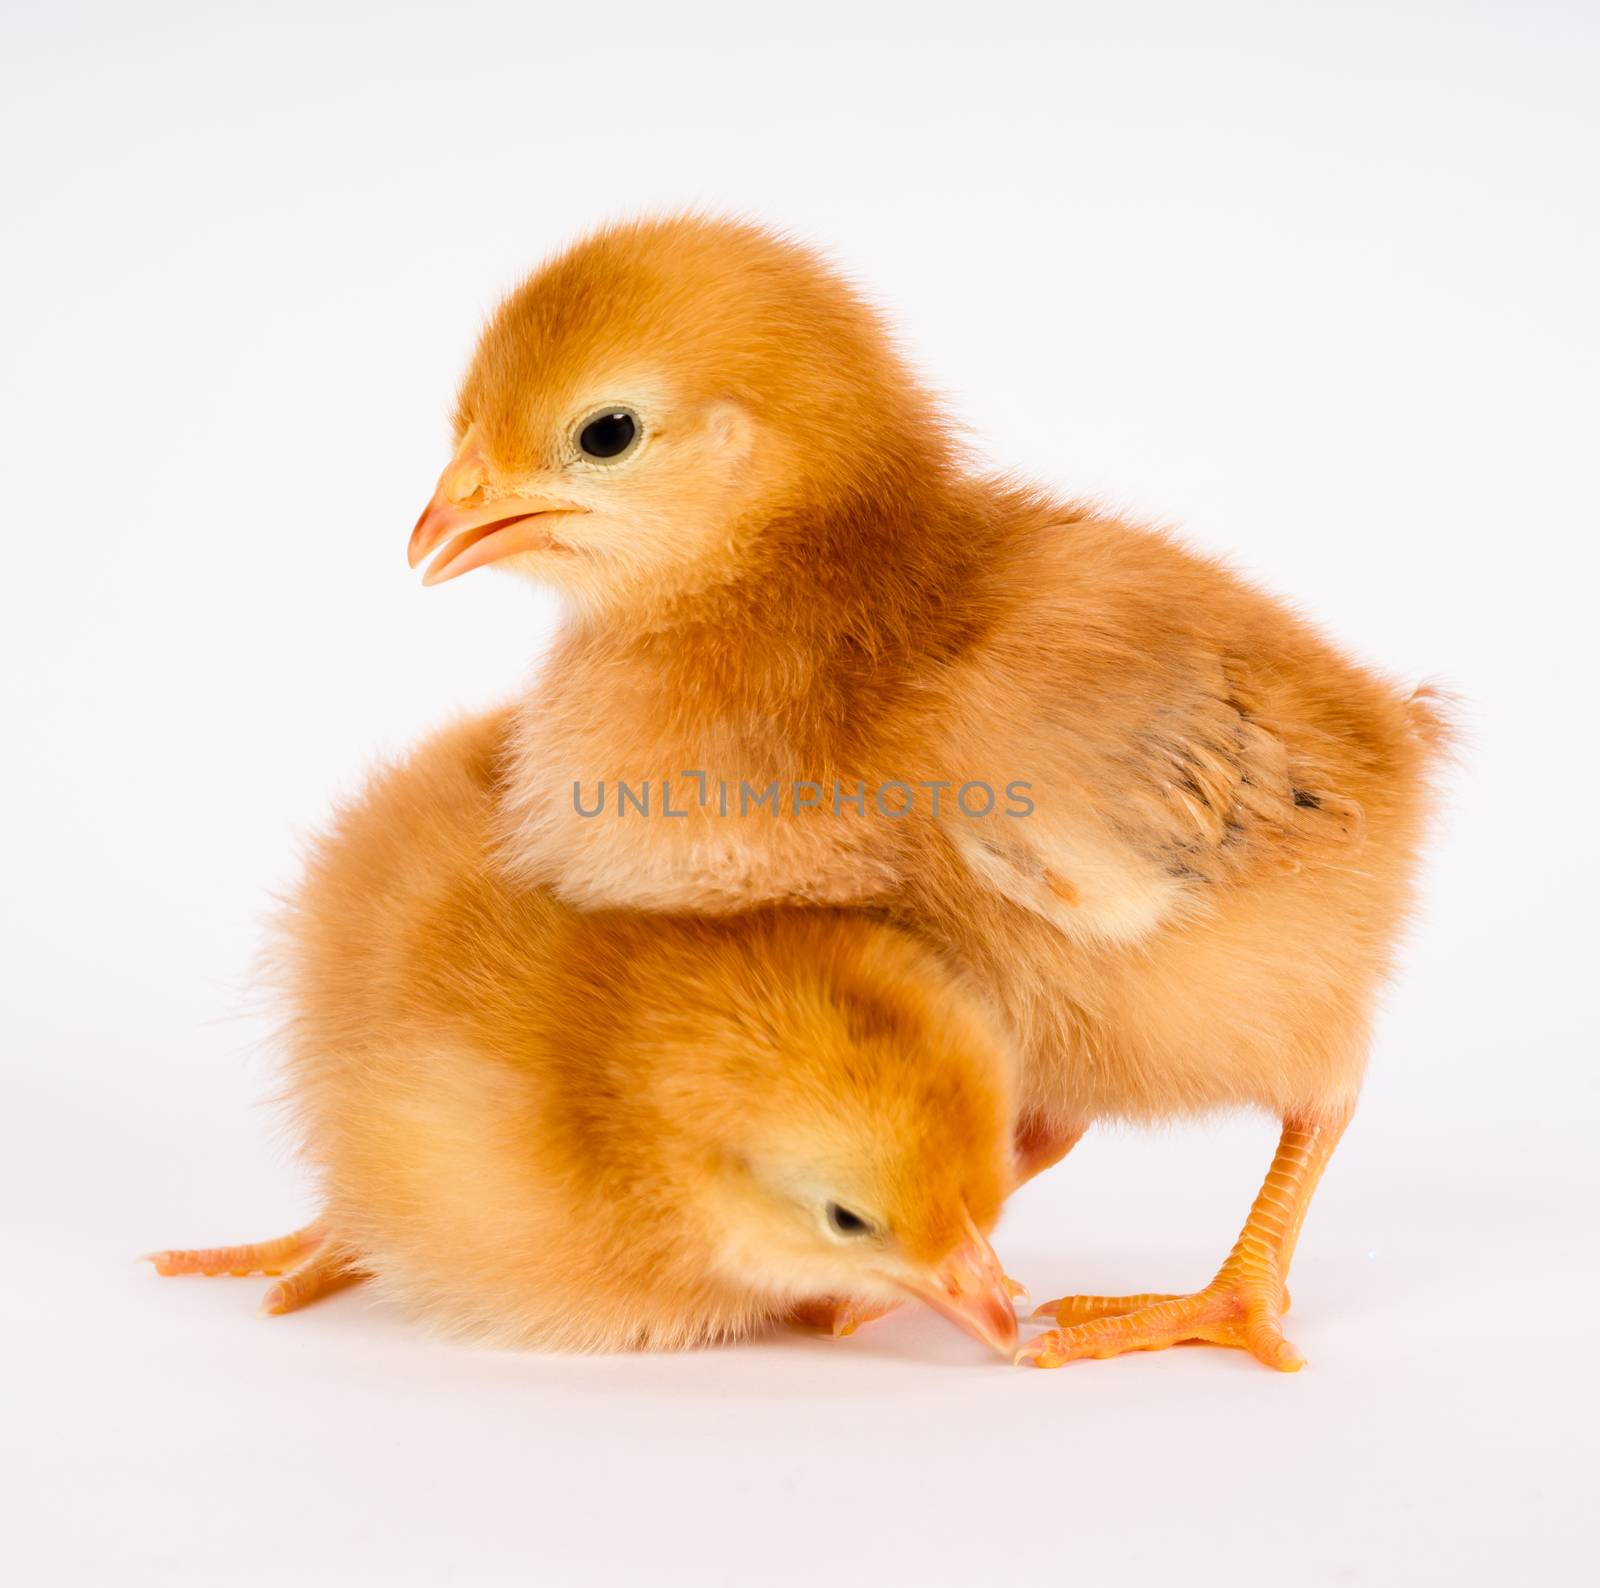 Baby Chick Newborn Farm Chickens Standing White Rhode Island Red by ChrisBoswell